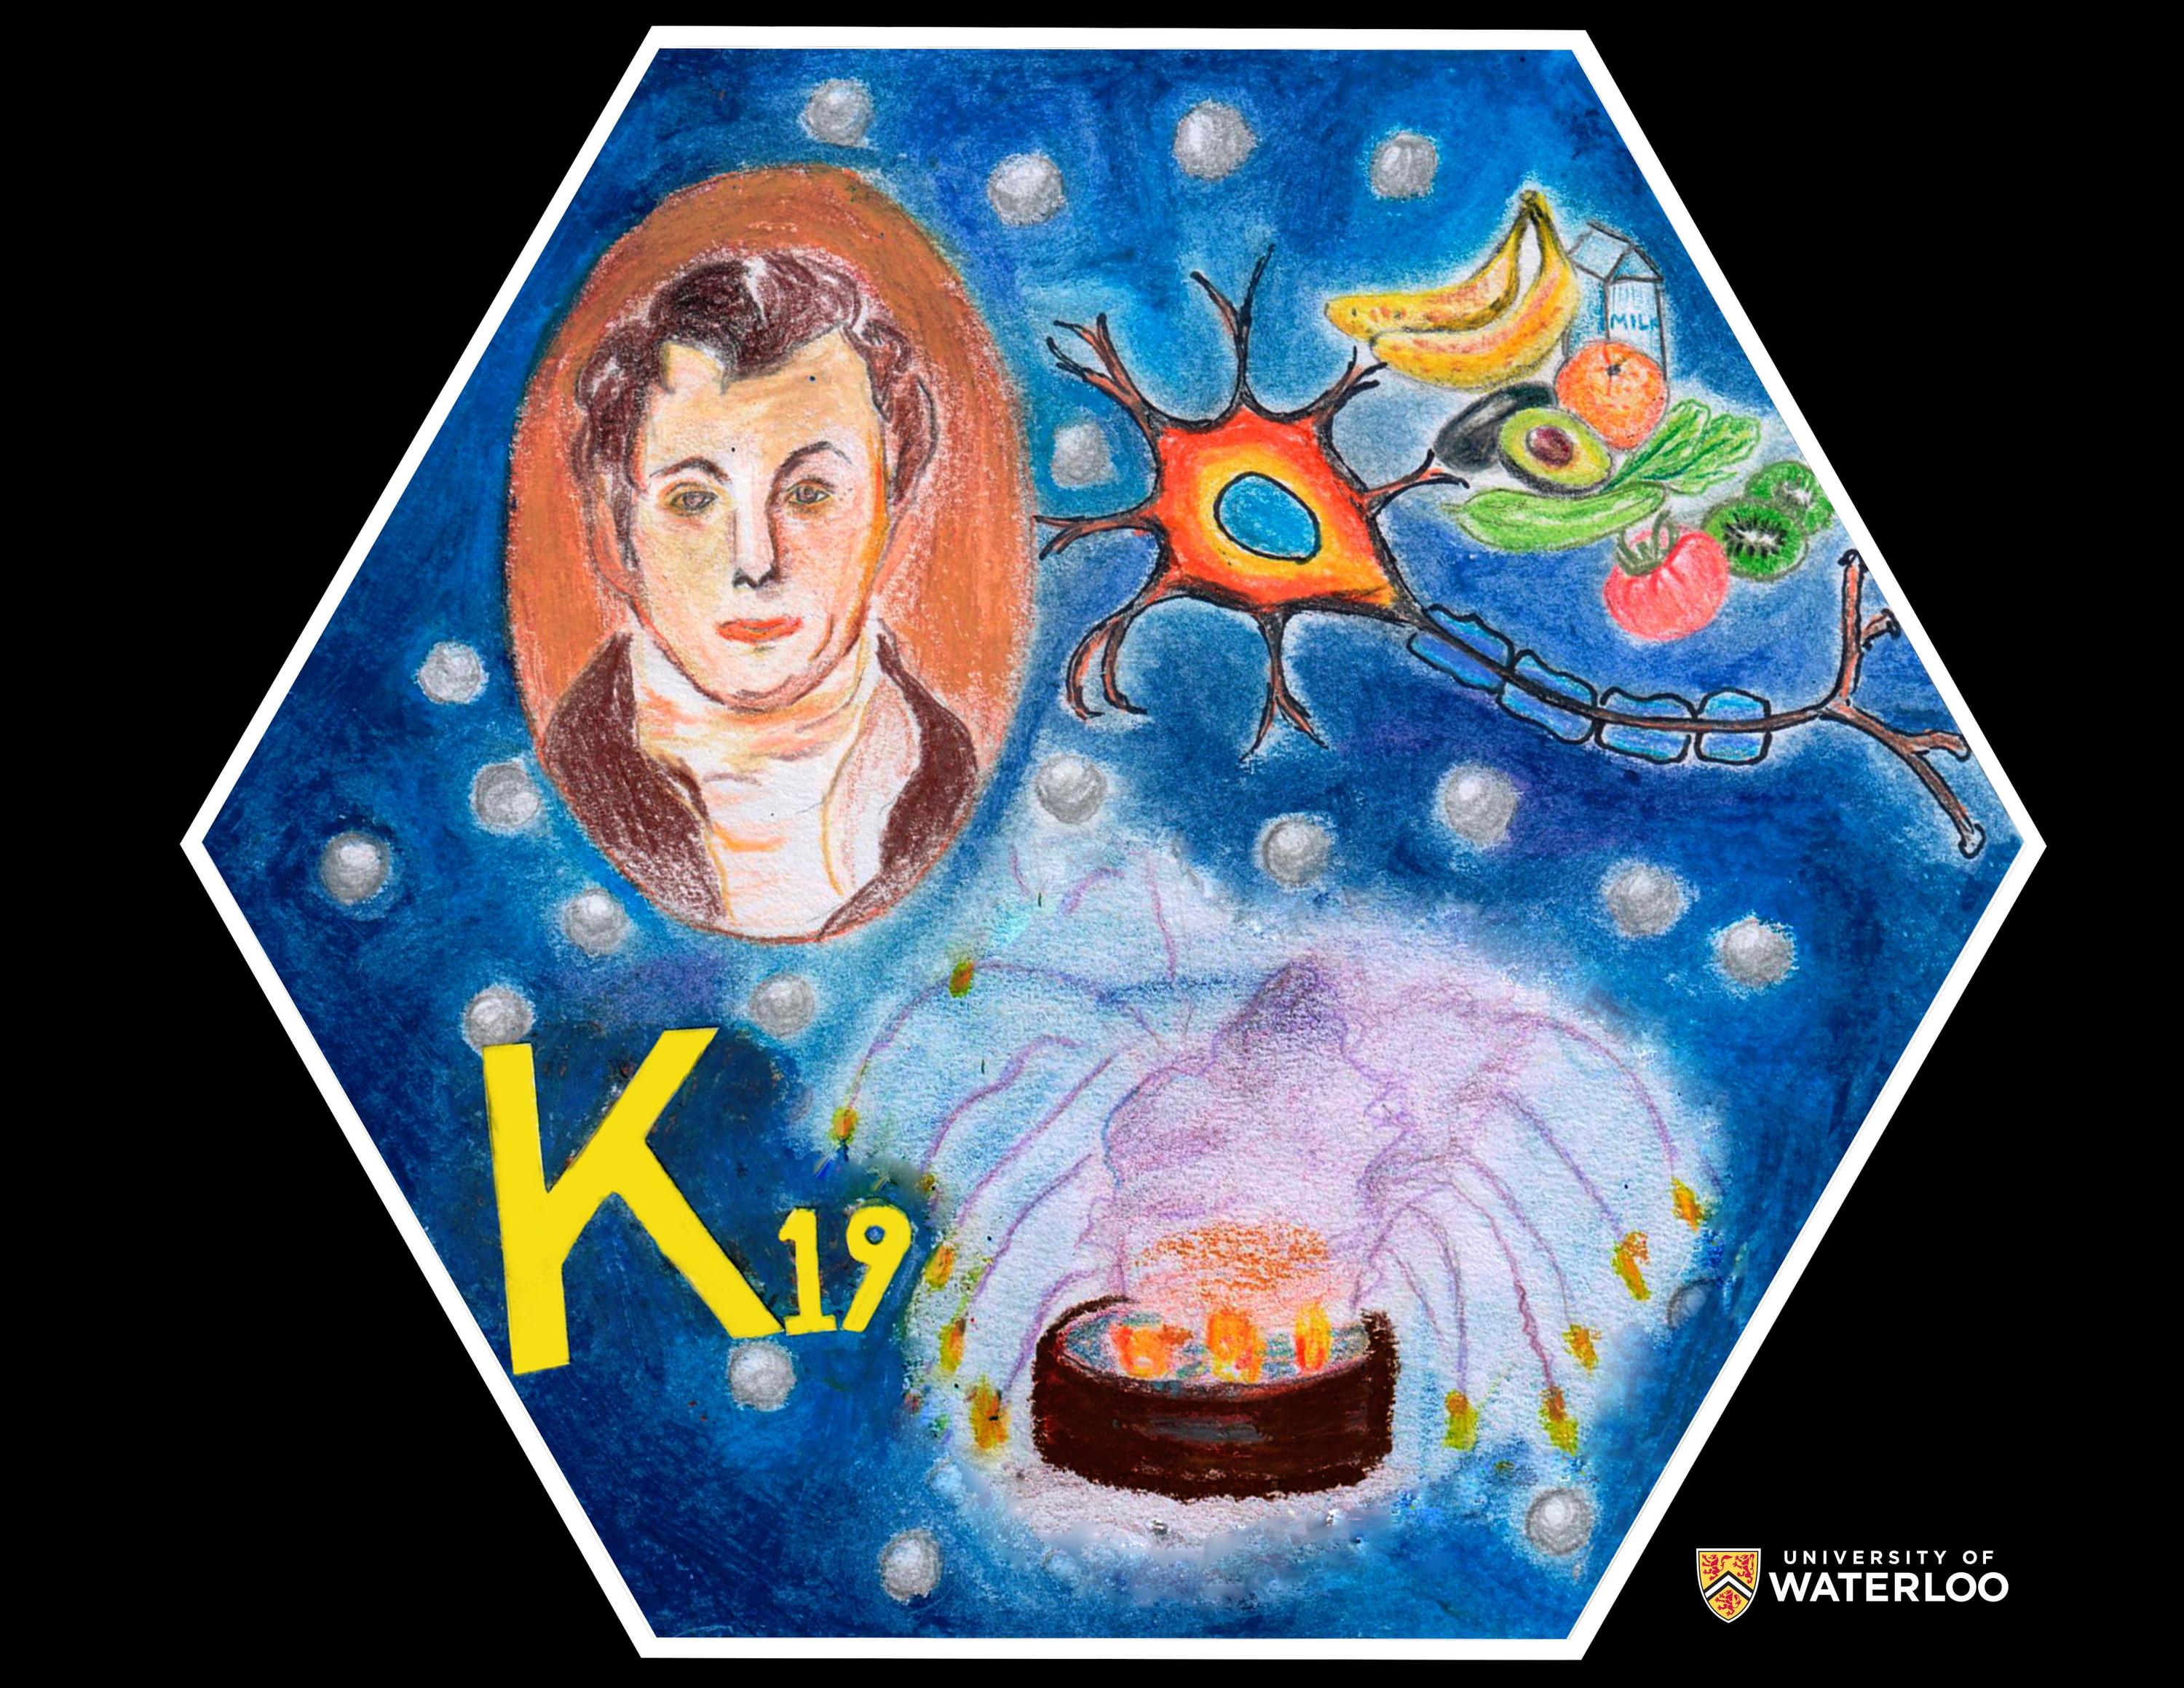 Charcoal on paper. Portrait of Sir Humphry Davy appears top left. Chemical symbol “K” and atomic number “19” below. Right are foods containing potassium, including fruits, vegetables, milk plus a nerve cell. Bottom is the original experiment between potassium and water. 19 silver balls dot the bright blue background.